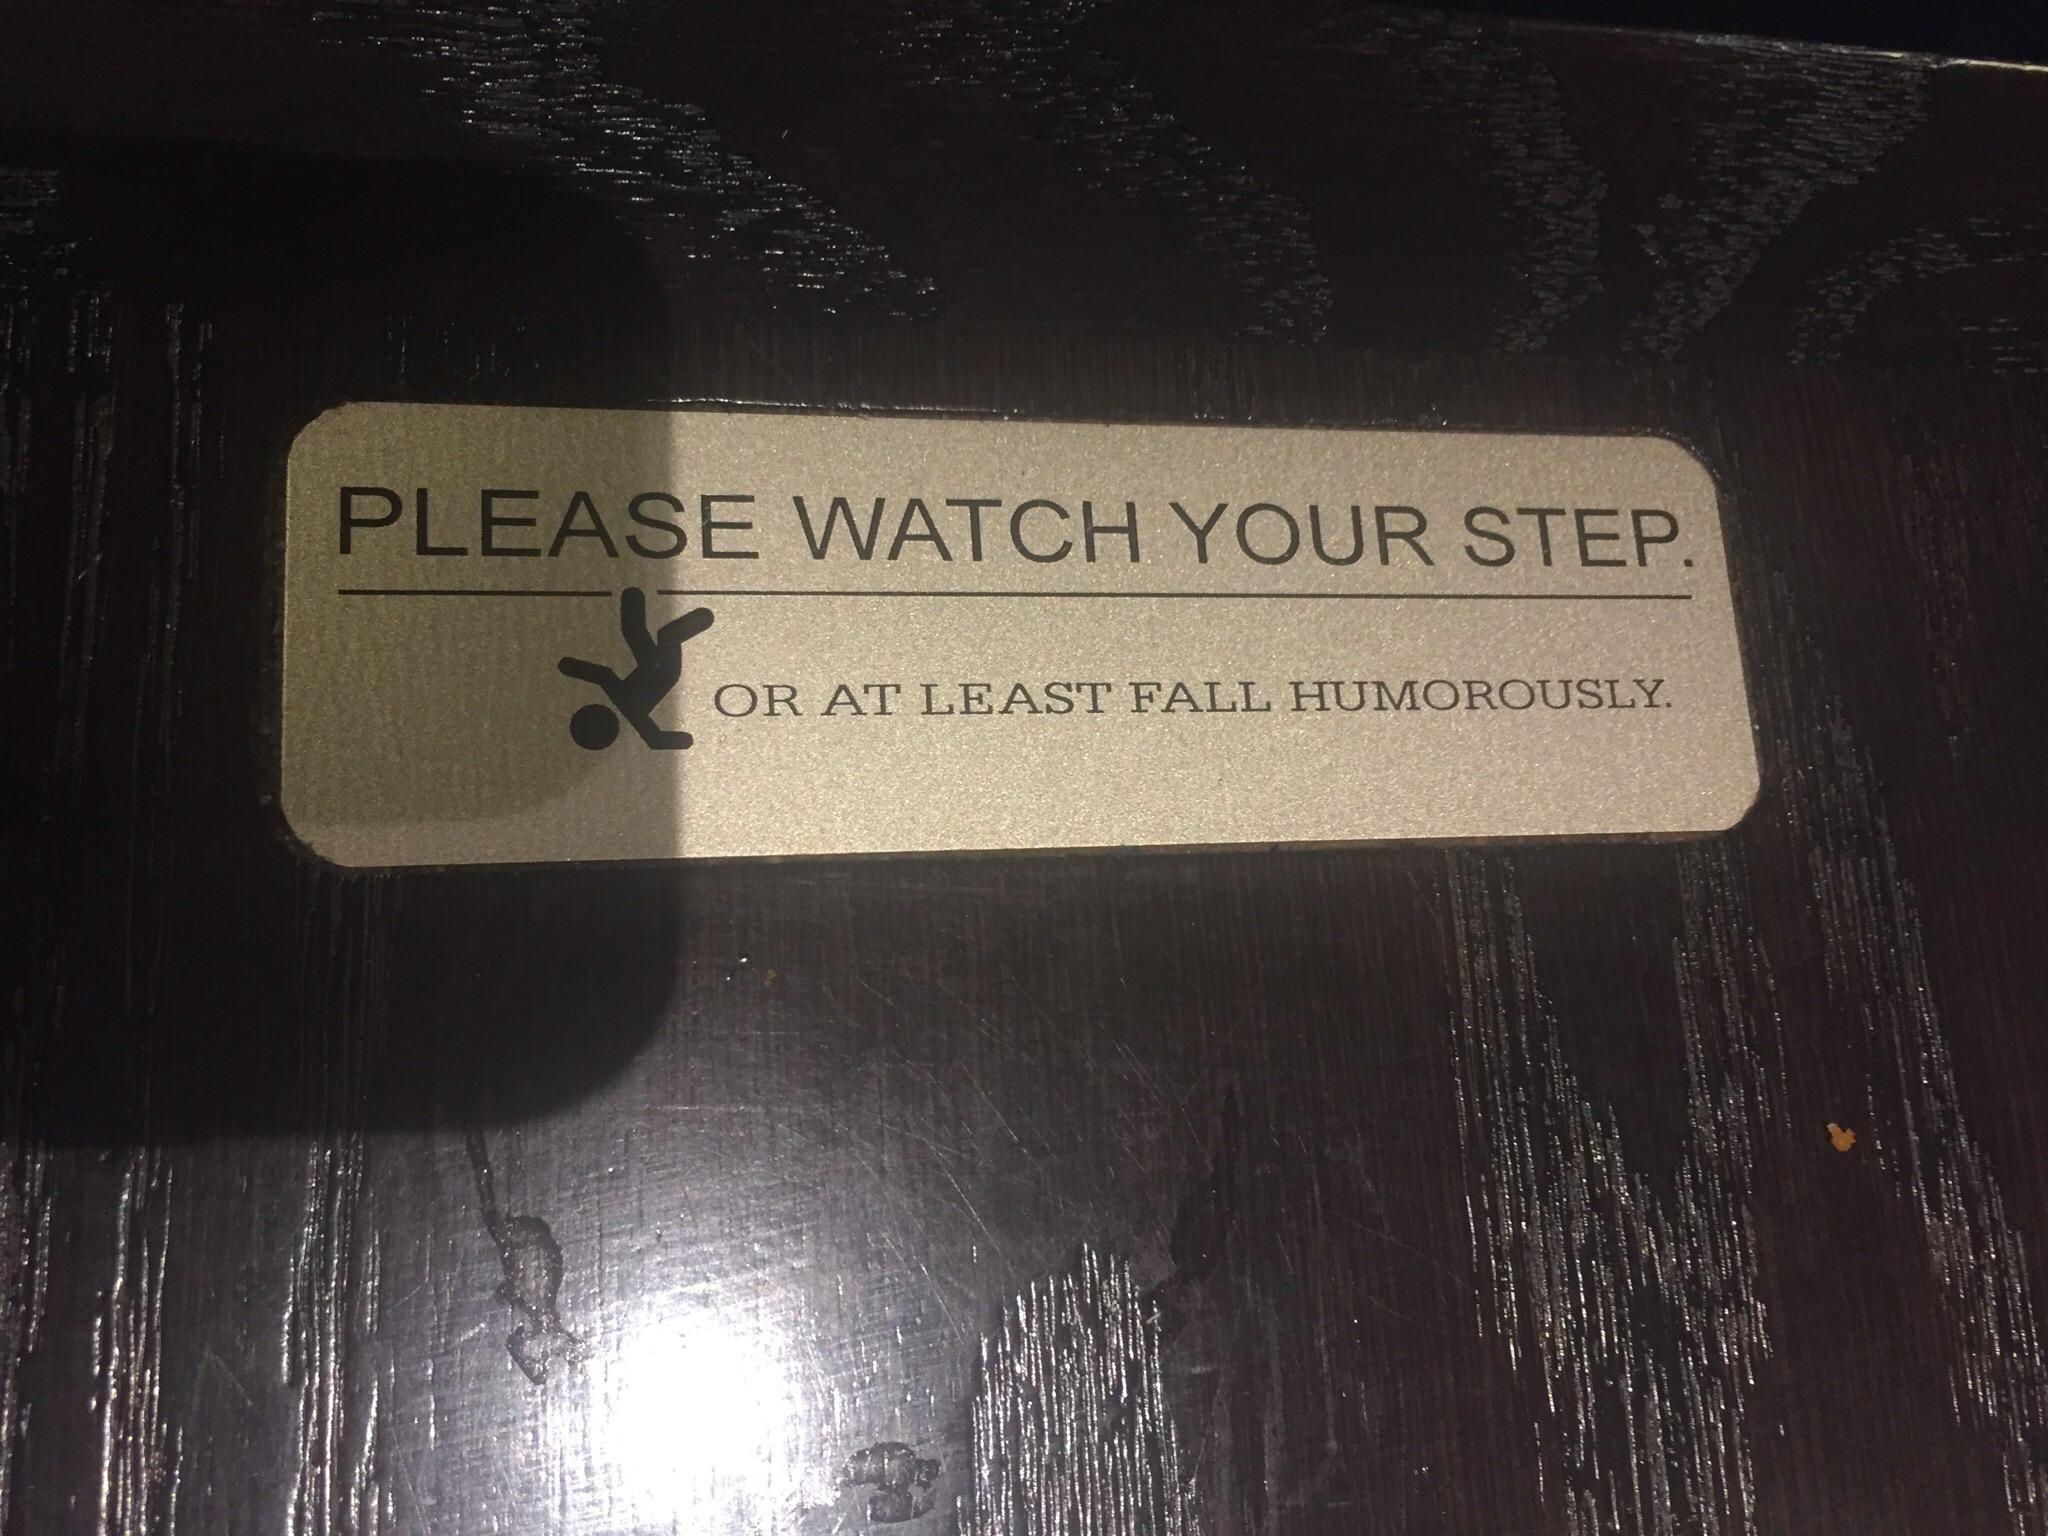 This watch your step sign at a restaurant I was at today